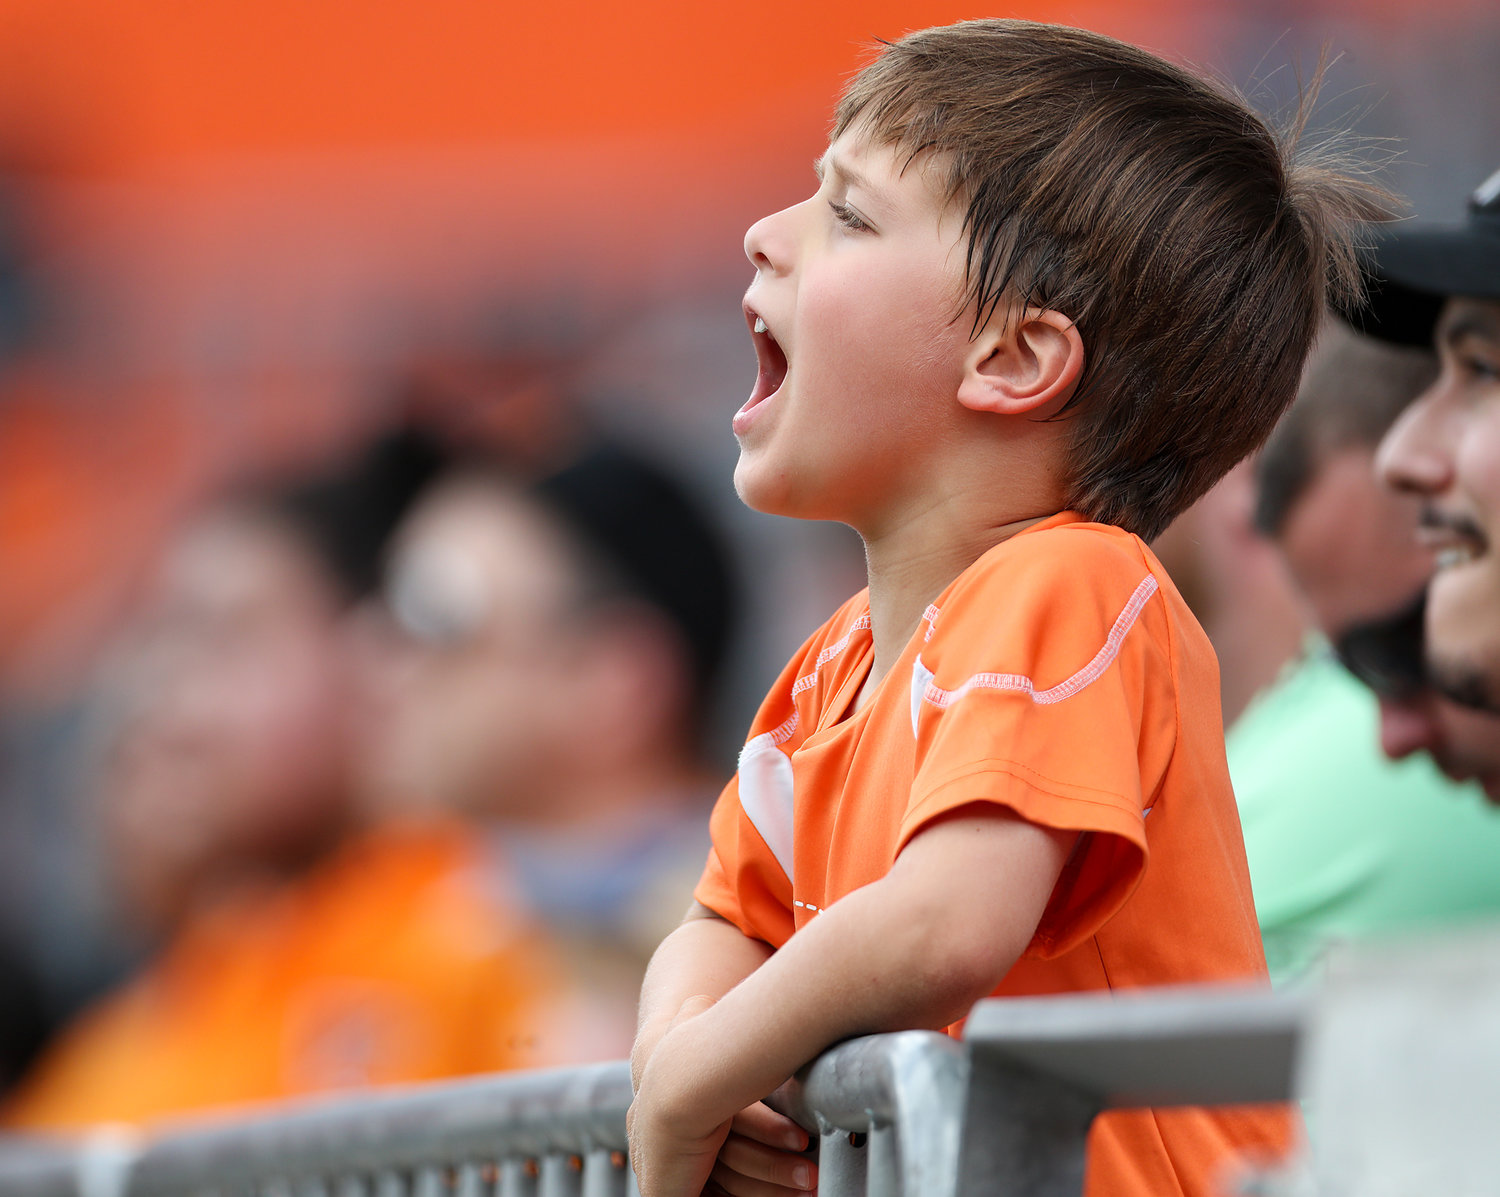 A young Houston Dynamo fan cheers during the first half of a Major League Soccer match between the Houston Dynamo and Austin FC on April 30, 2022 in Houston, Texas.